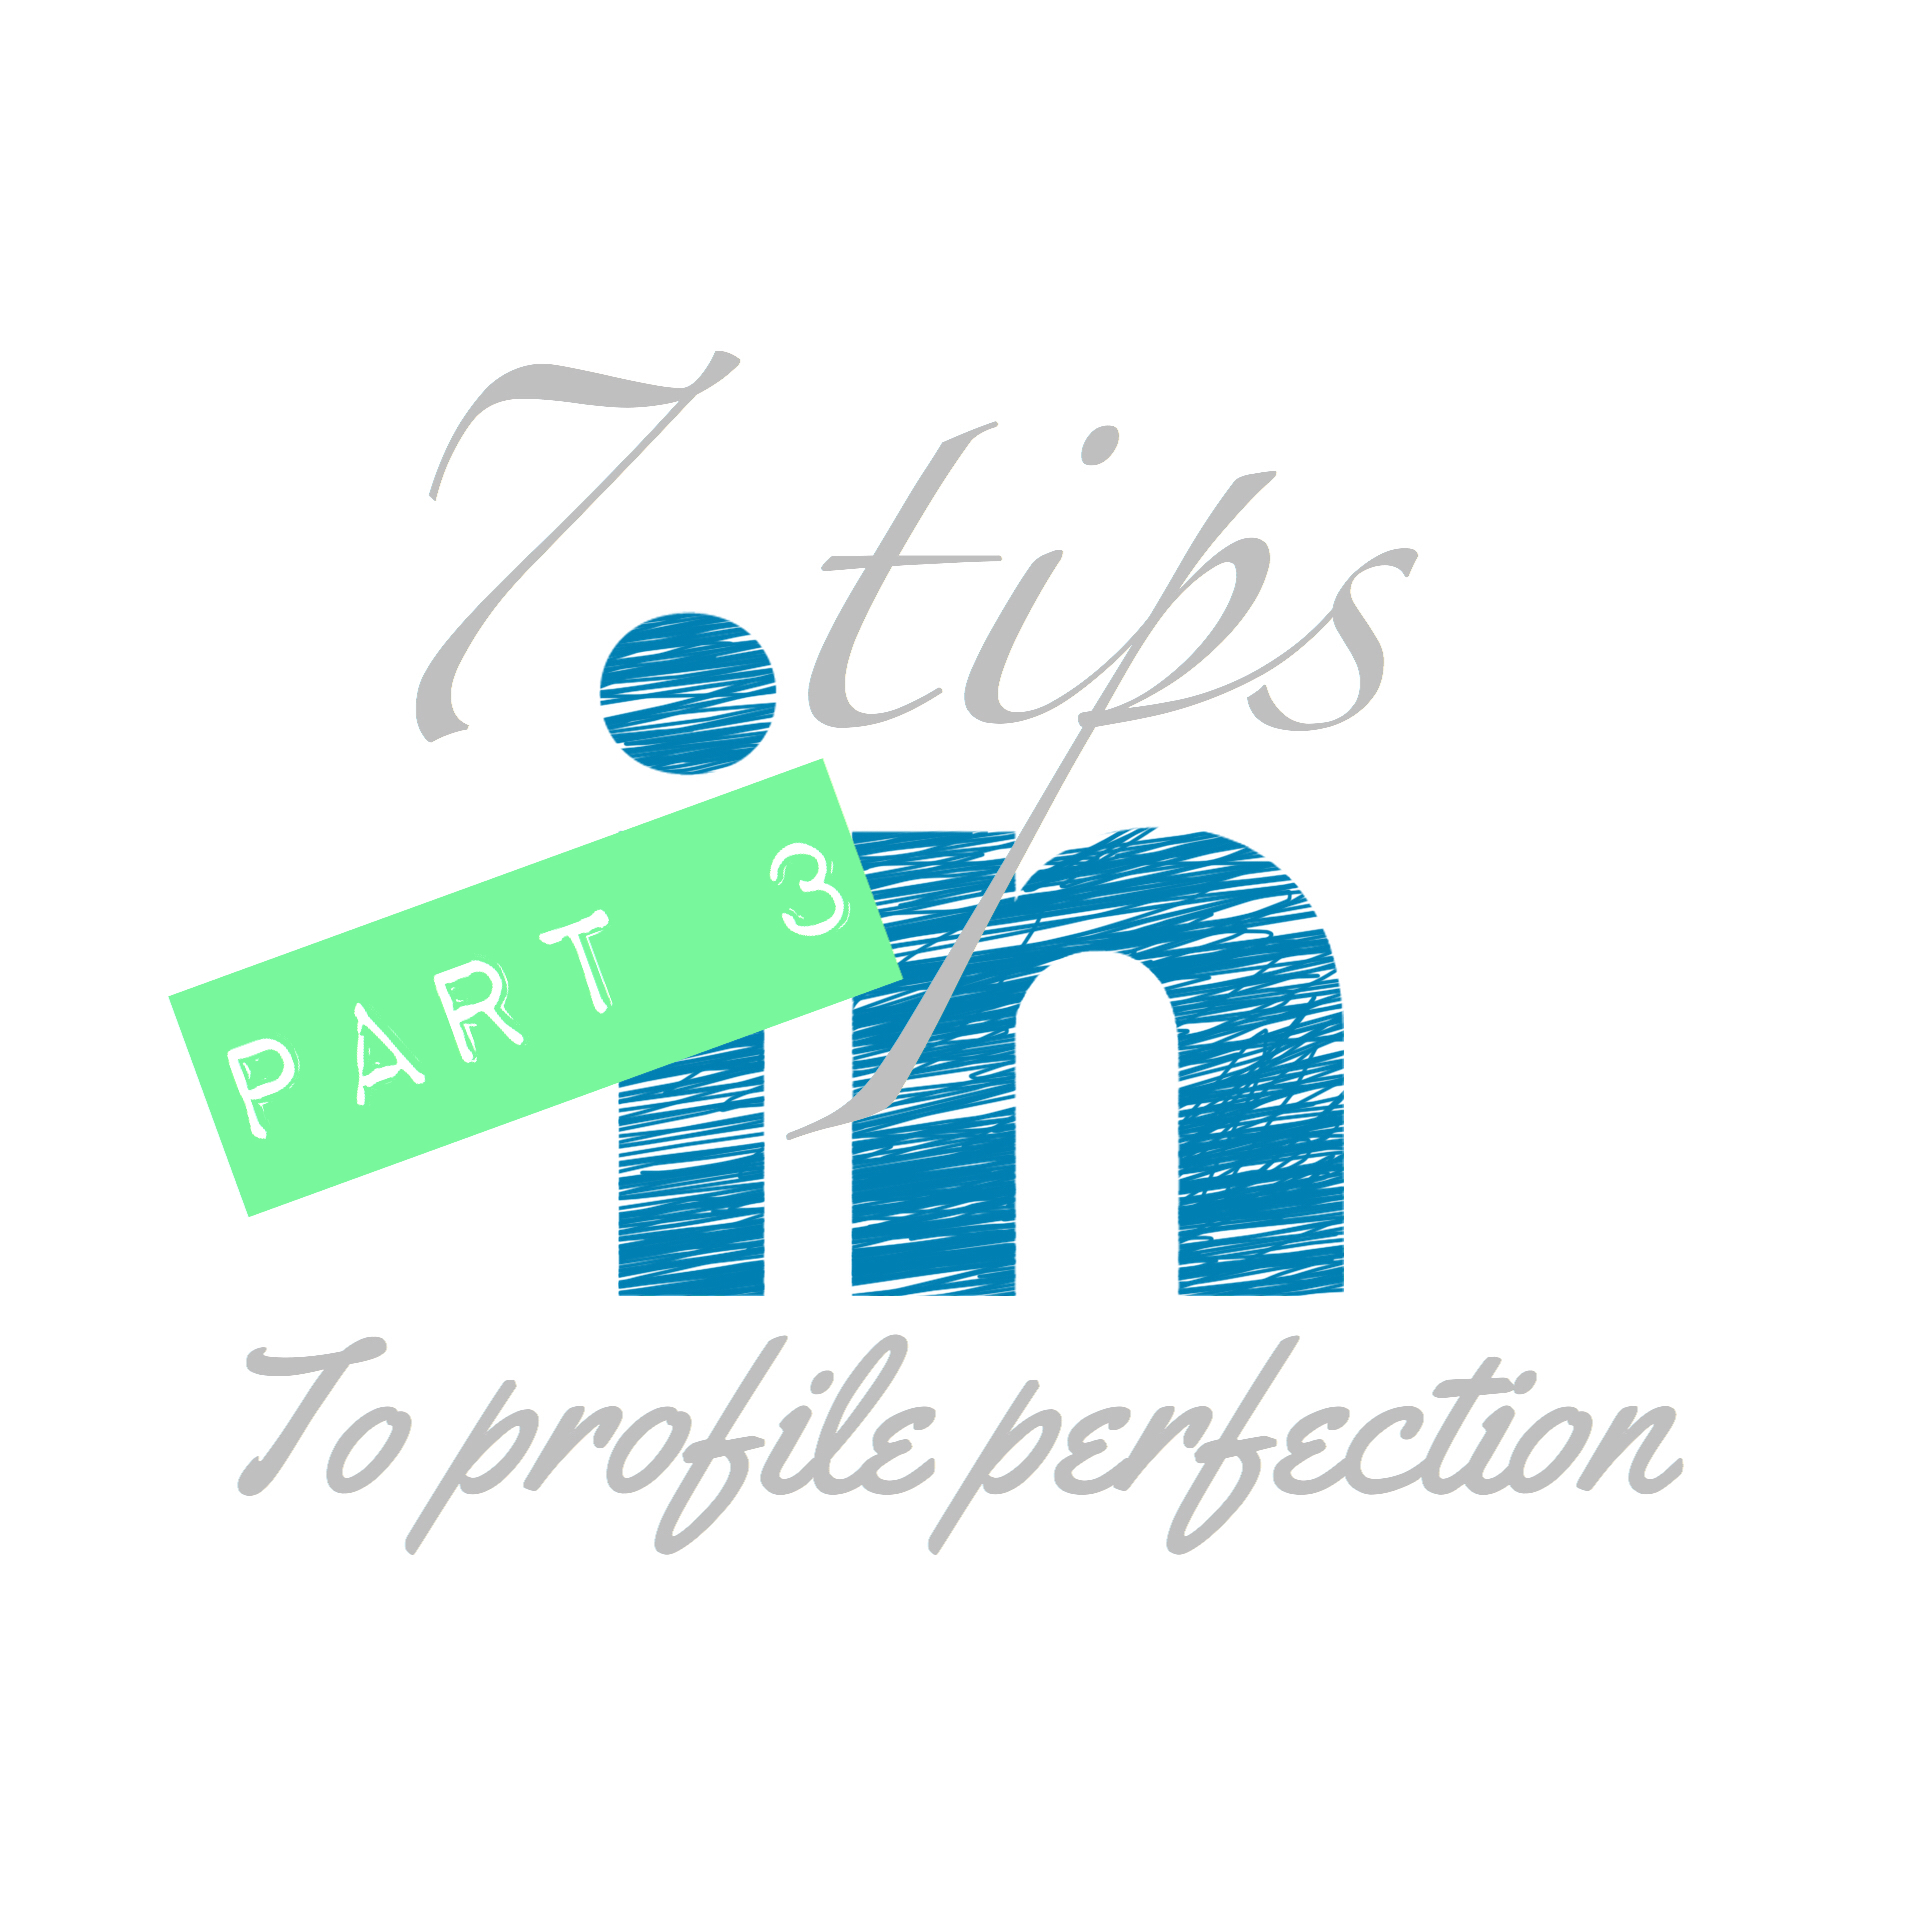 7 tips to LinkedIn Profile Perfection (Part 3) - Need a New Gig?